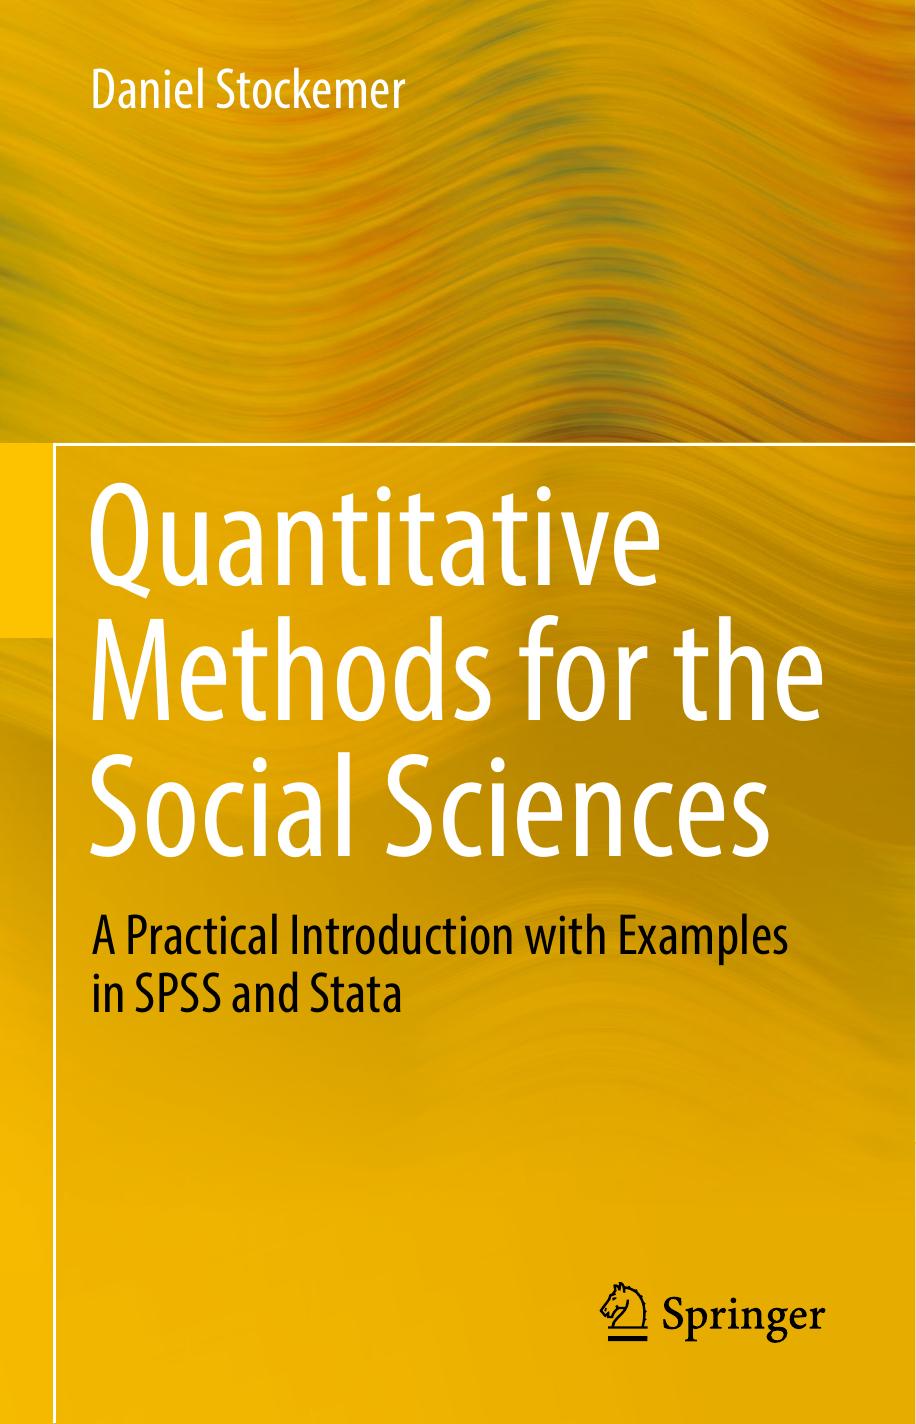 Quantitative Methods for the Social Sciences  A Practical Introduction with Examples in SPSS and Stata 2019